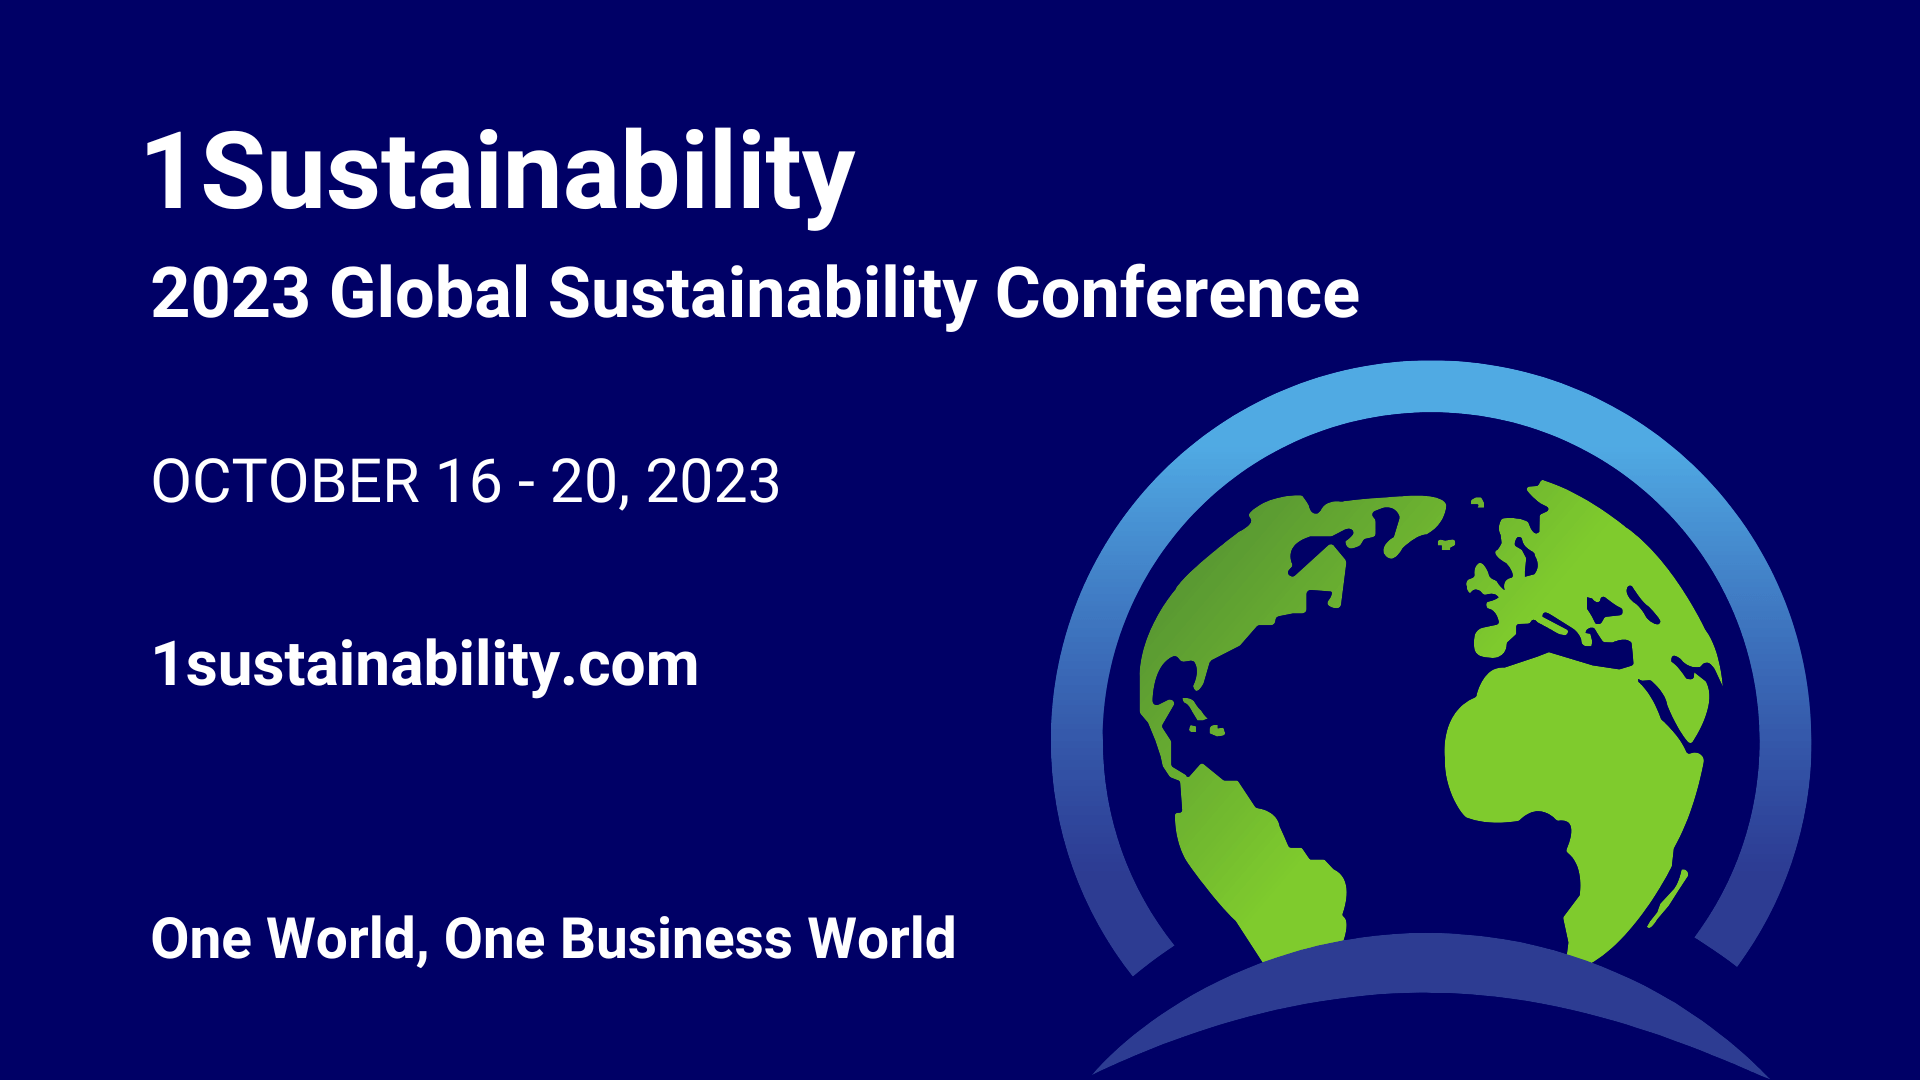 2023 1Sustainability banners